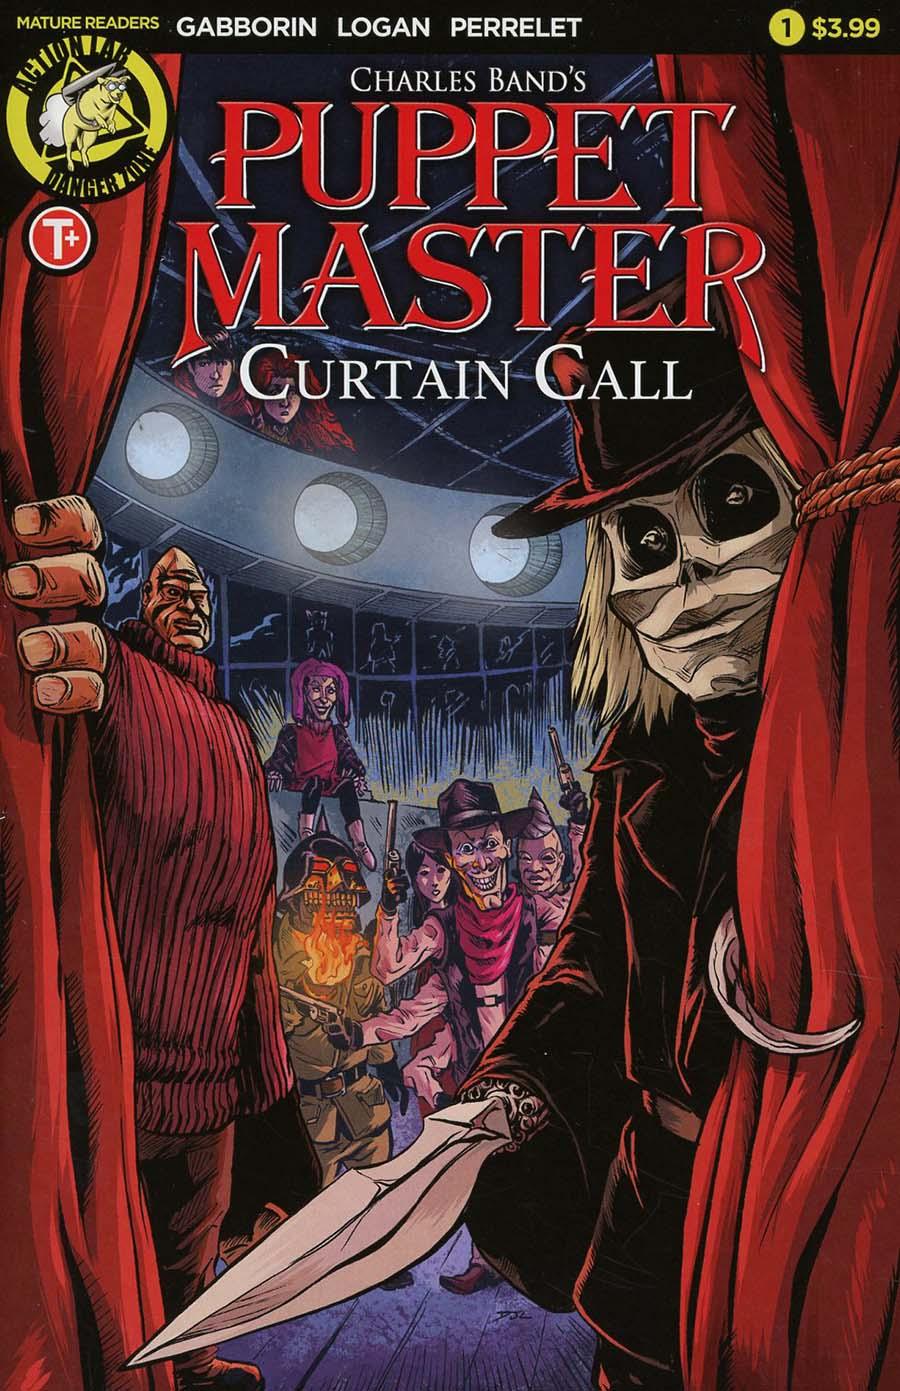 Puppet Master Curtain Call Vol. 1 #1